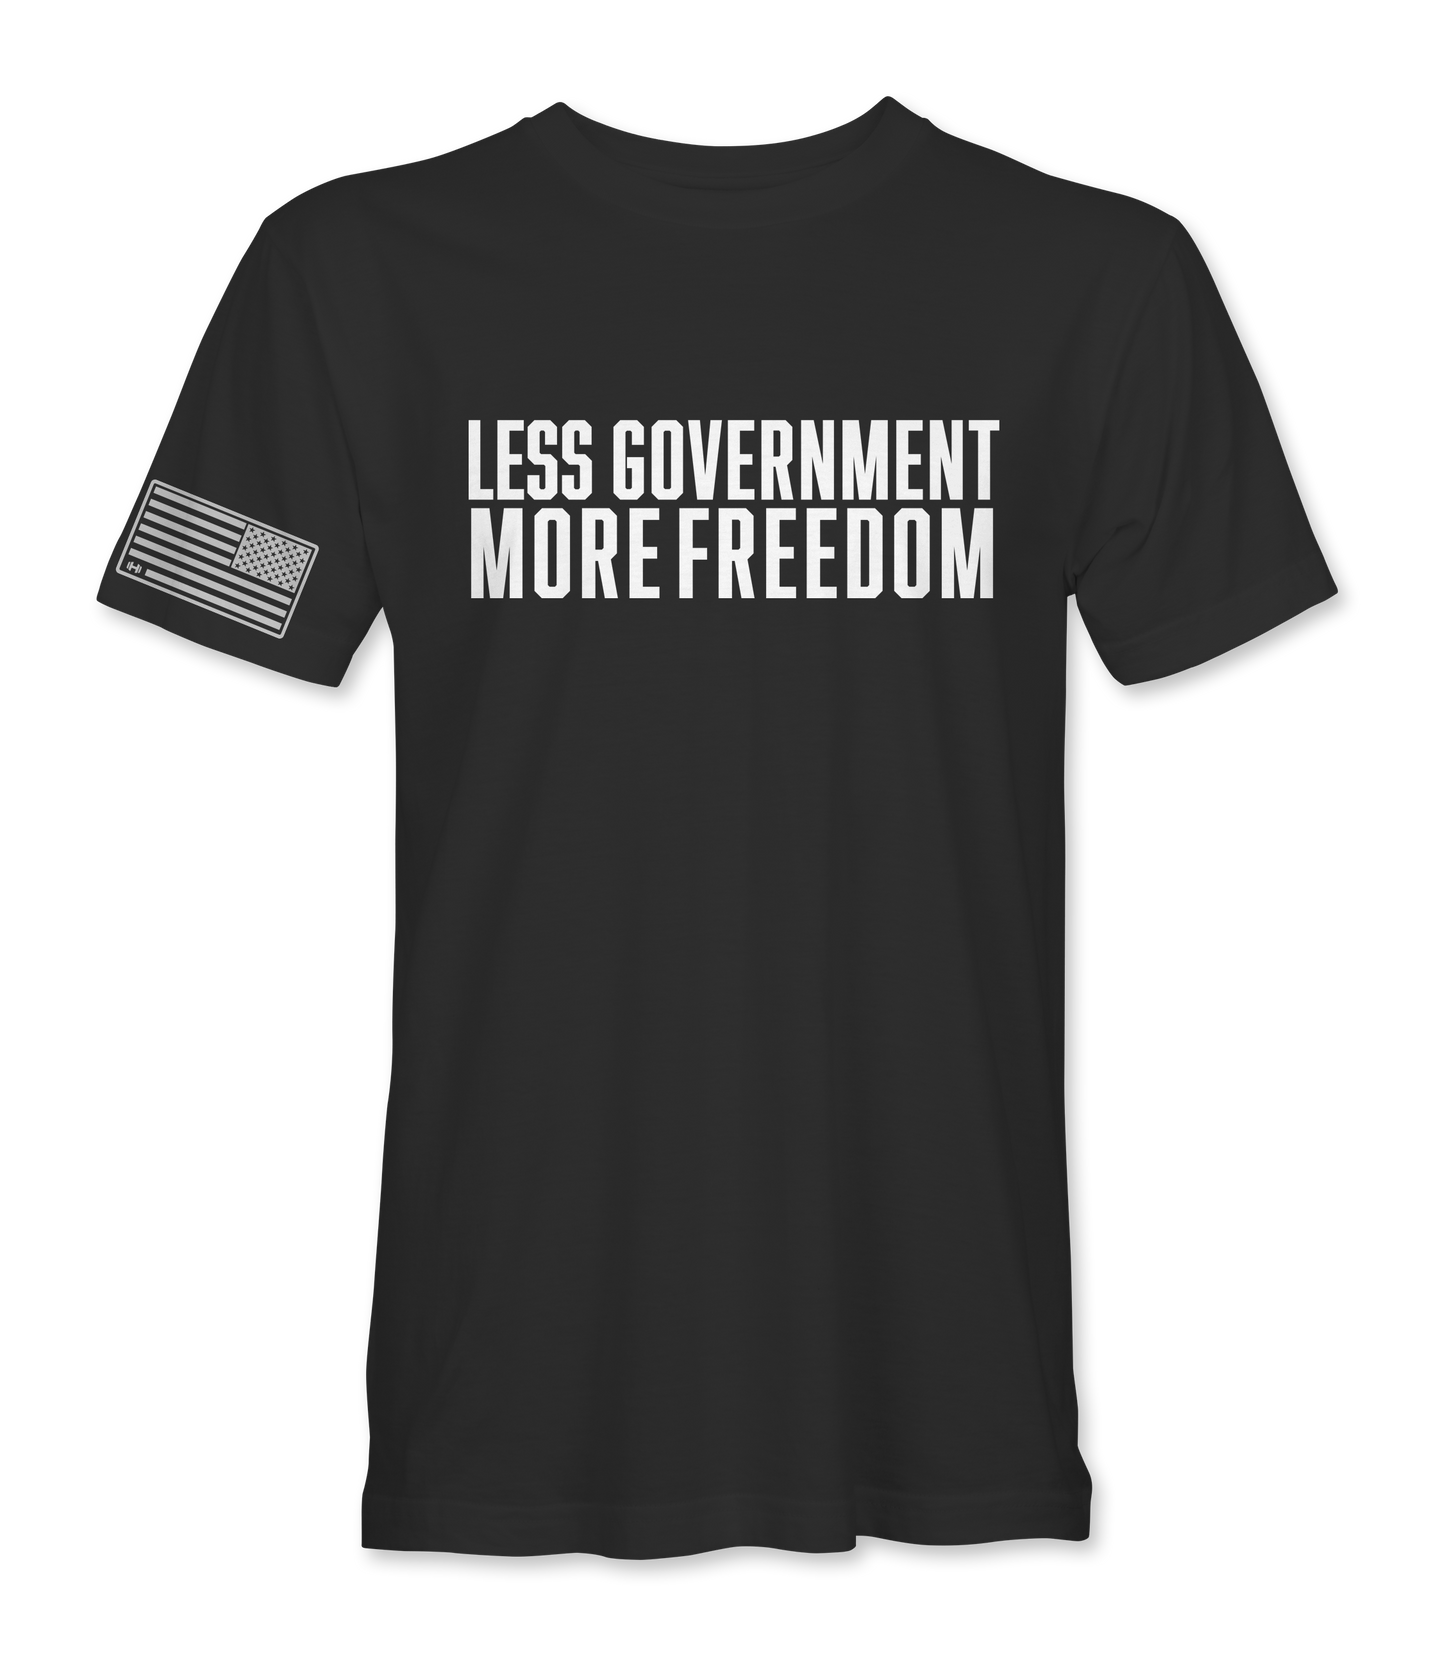 Less Government More Freedom T-Shirt